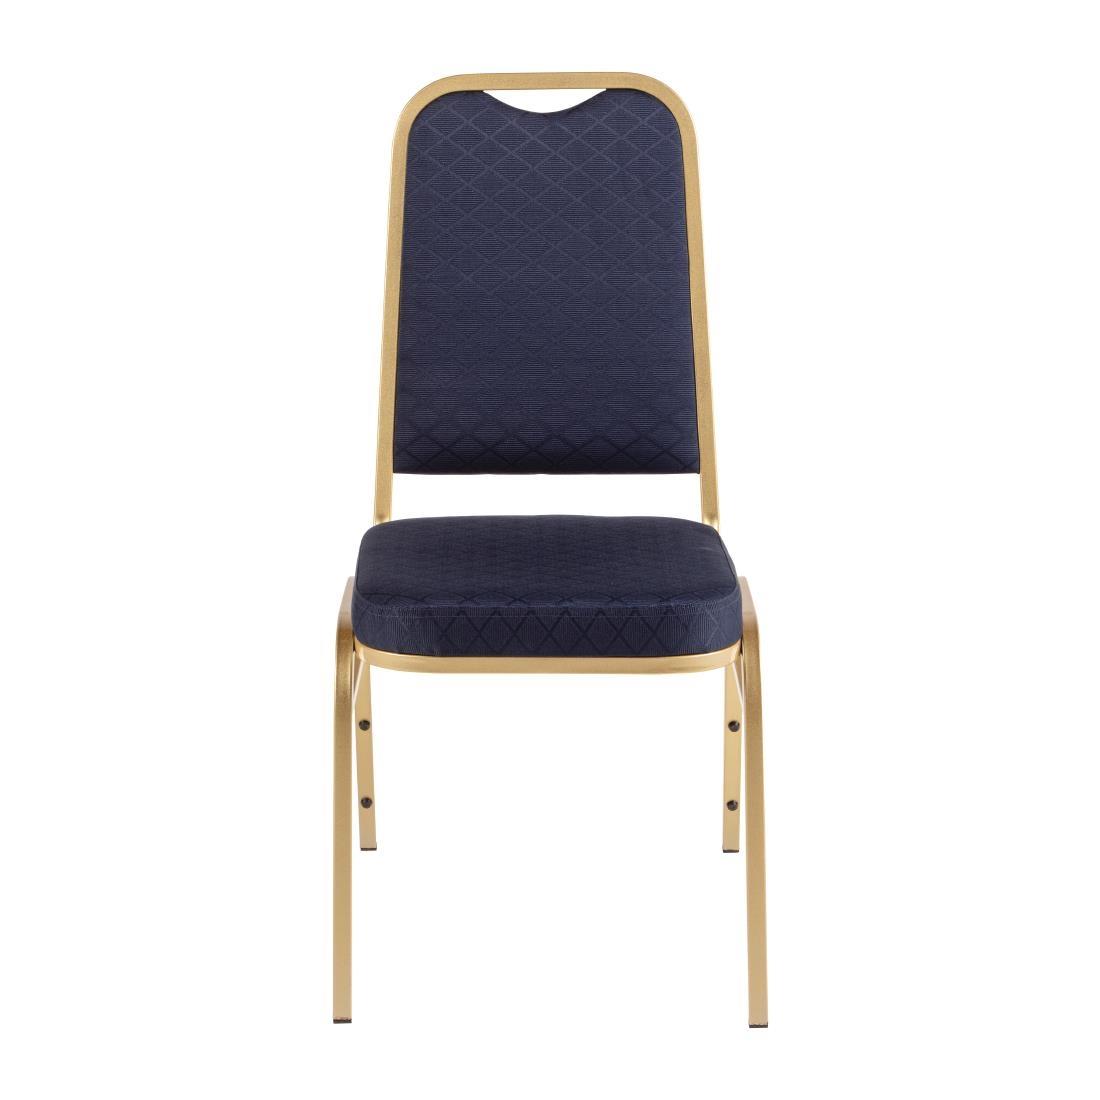 Bolero Square Back Banquet Chairs Blue & Gold (Pack of 4) - DL015  - 2